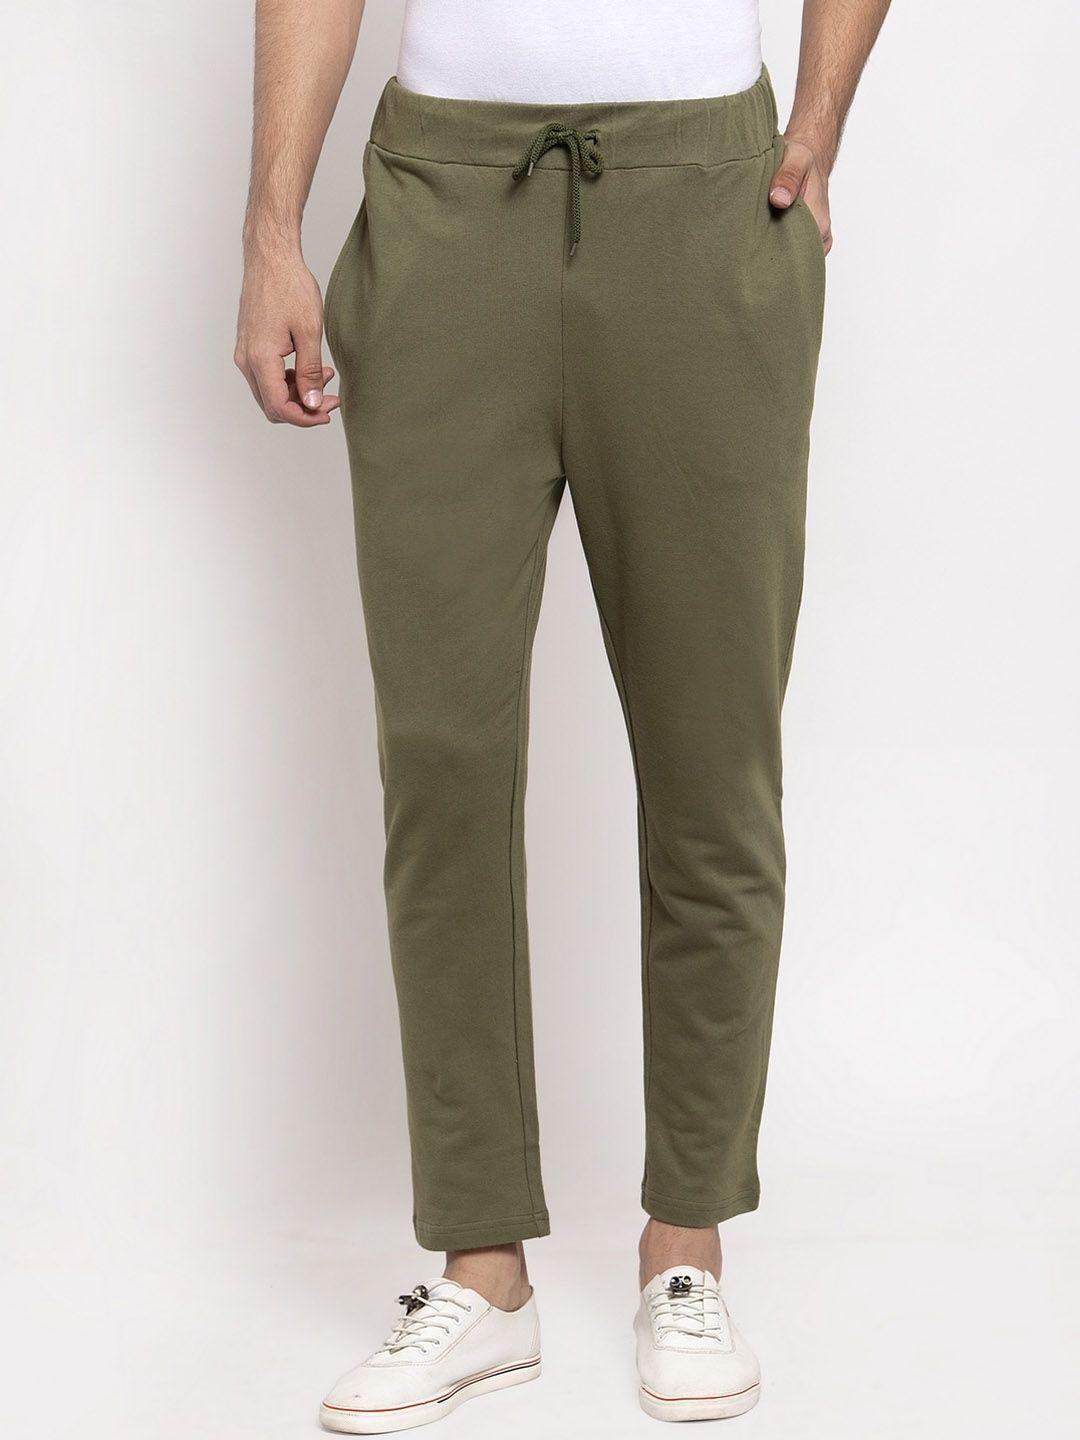 door74 men olive colored solid relaxed-fit track pant